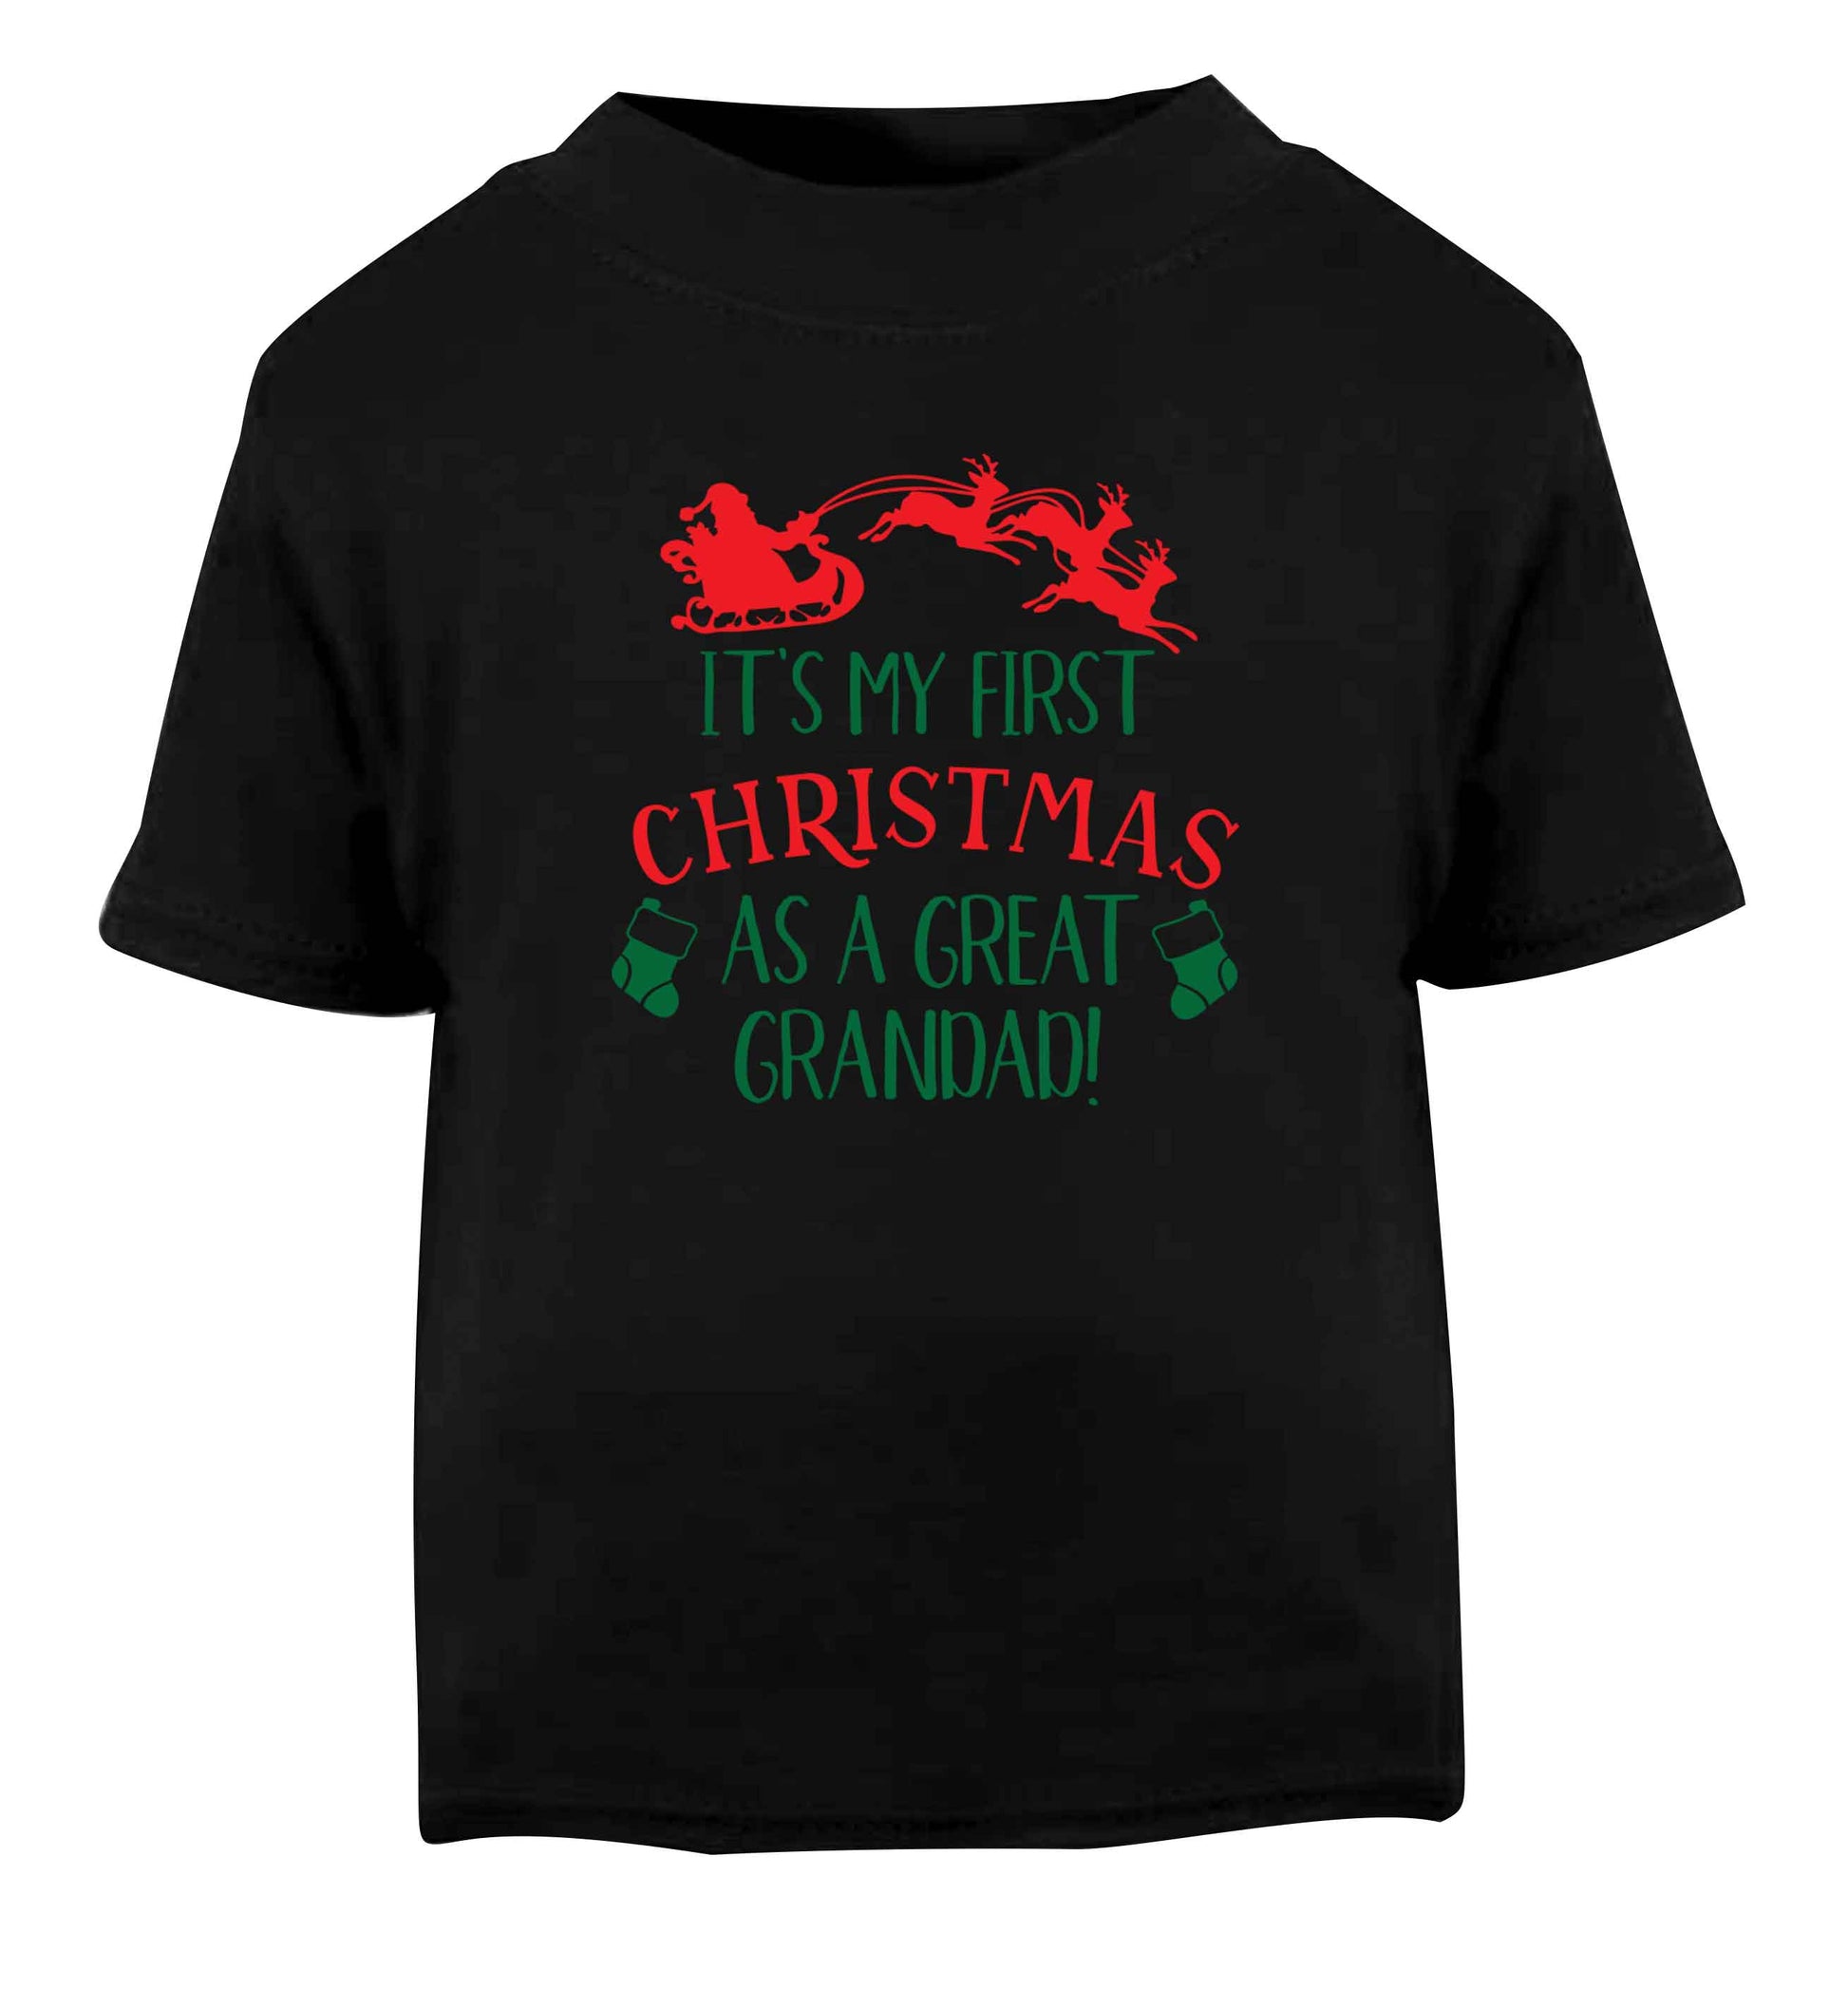 It's my first Christmas as a great grandad! Black Baby Toddler Tshirt 2 years